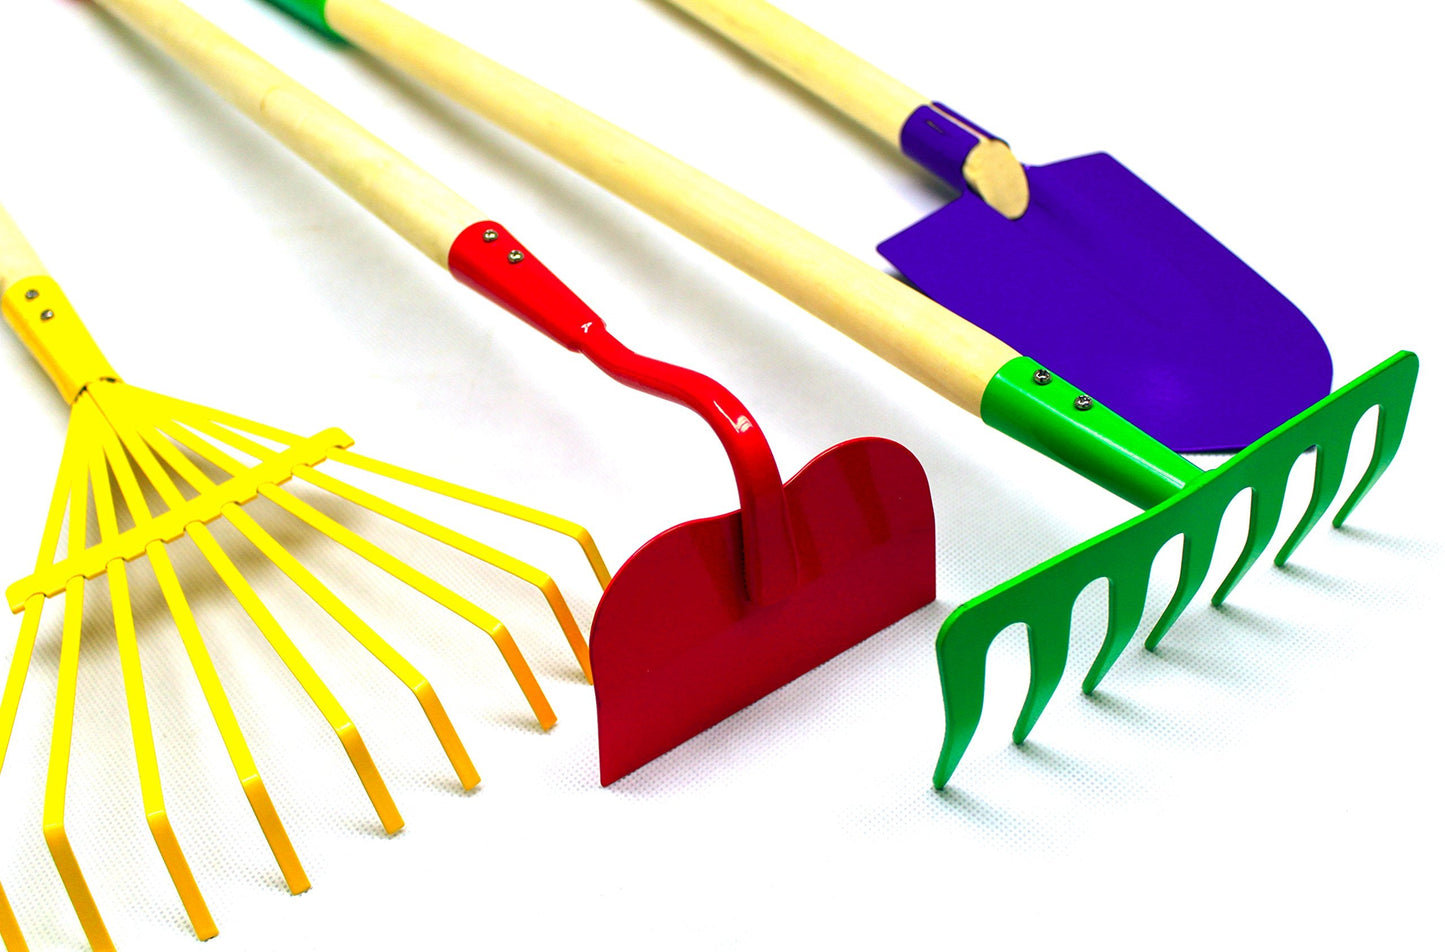 Kids Garden Tool Set Toy, Rake, Spade, Hoe and Leaf Rake, reduced size , made of sturdy steel heads and real wood handle, 4-Piece, Multicolored